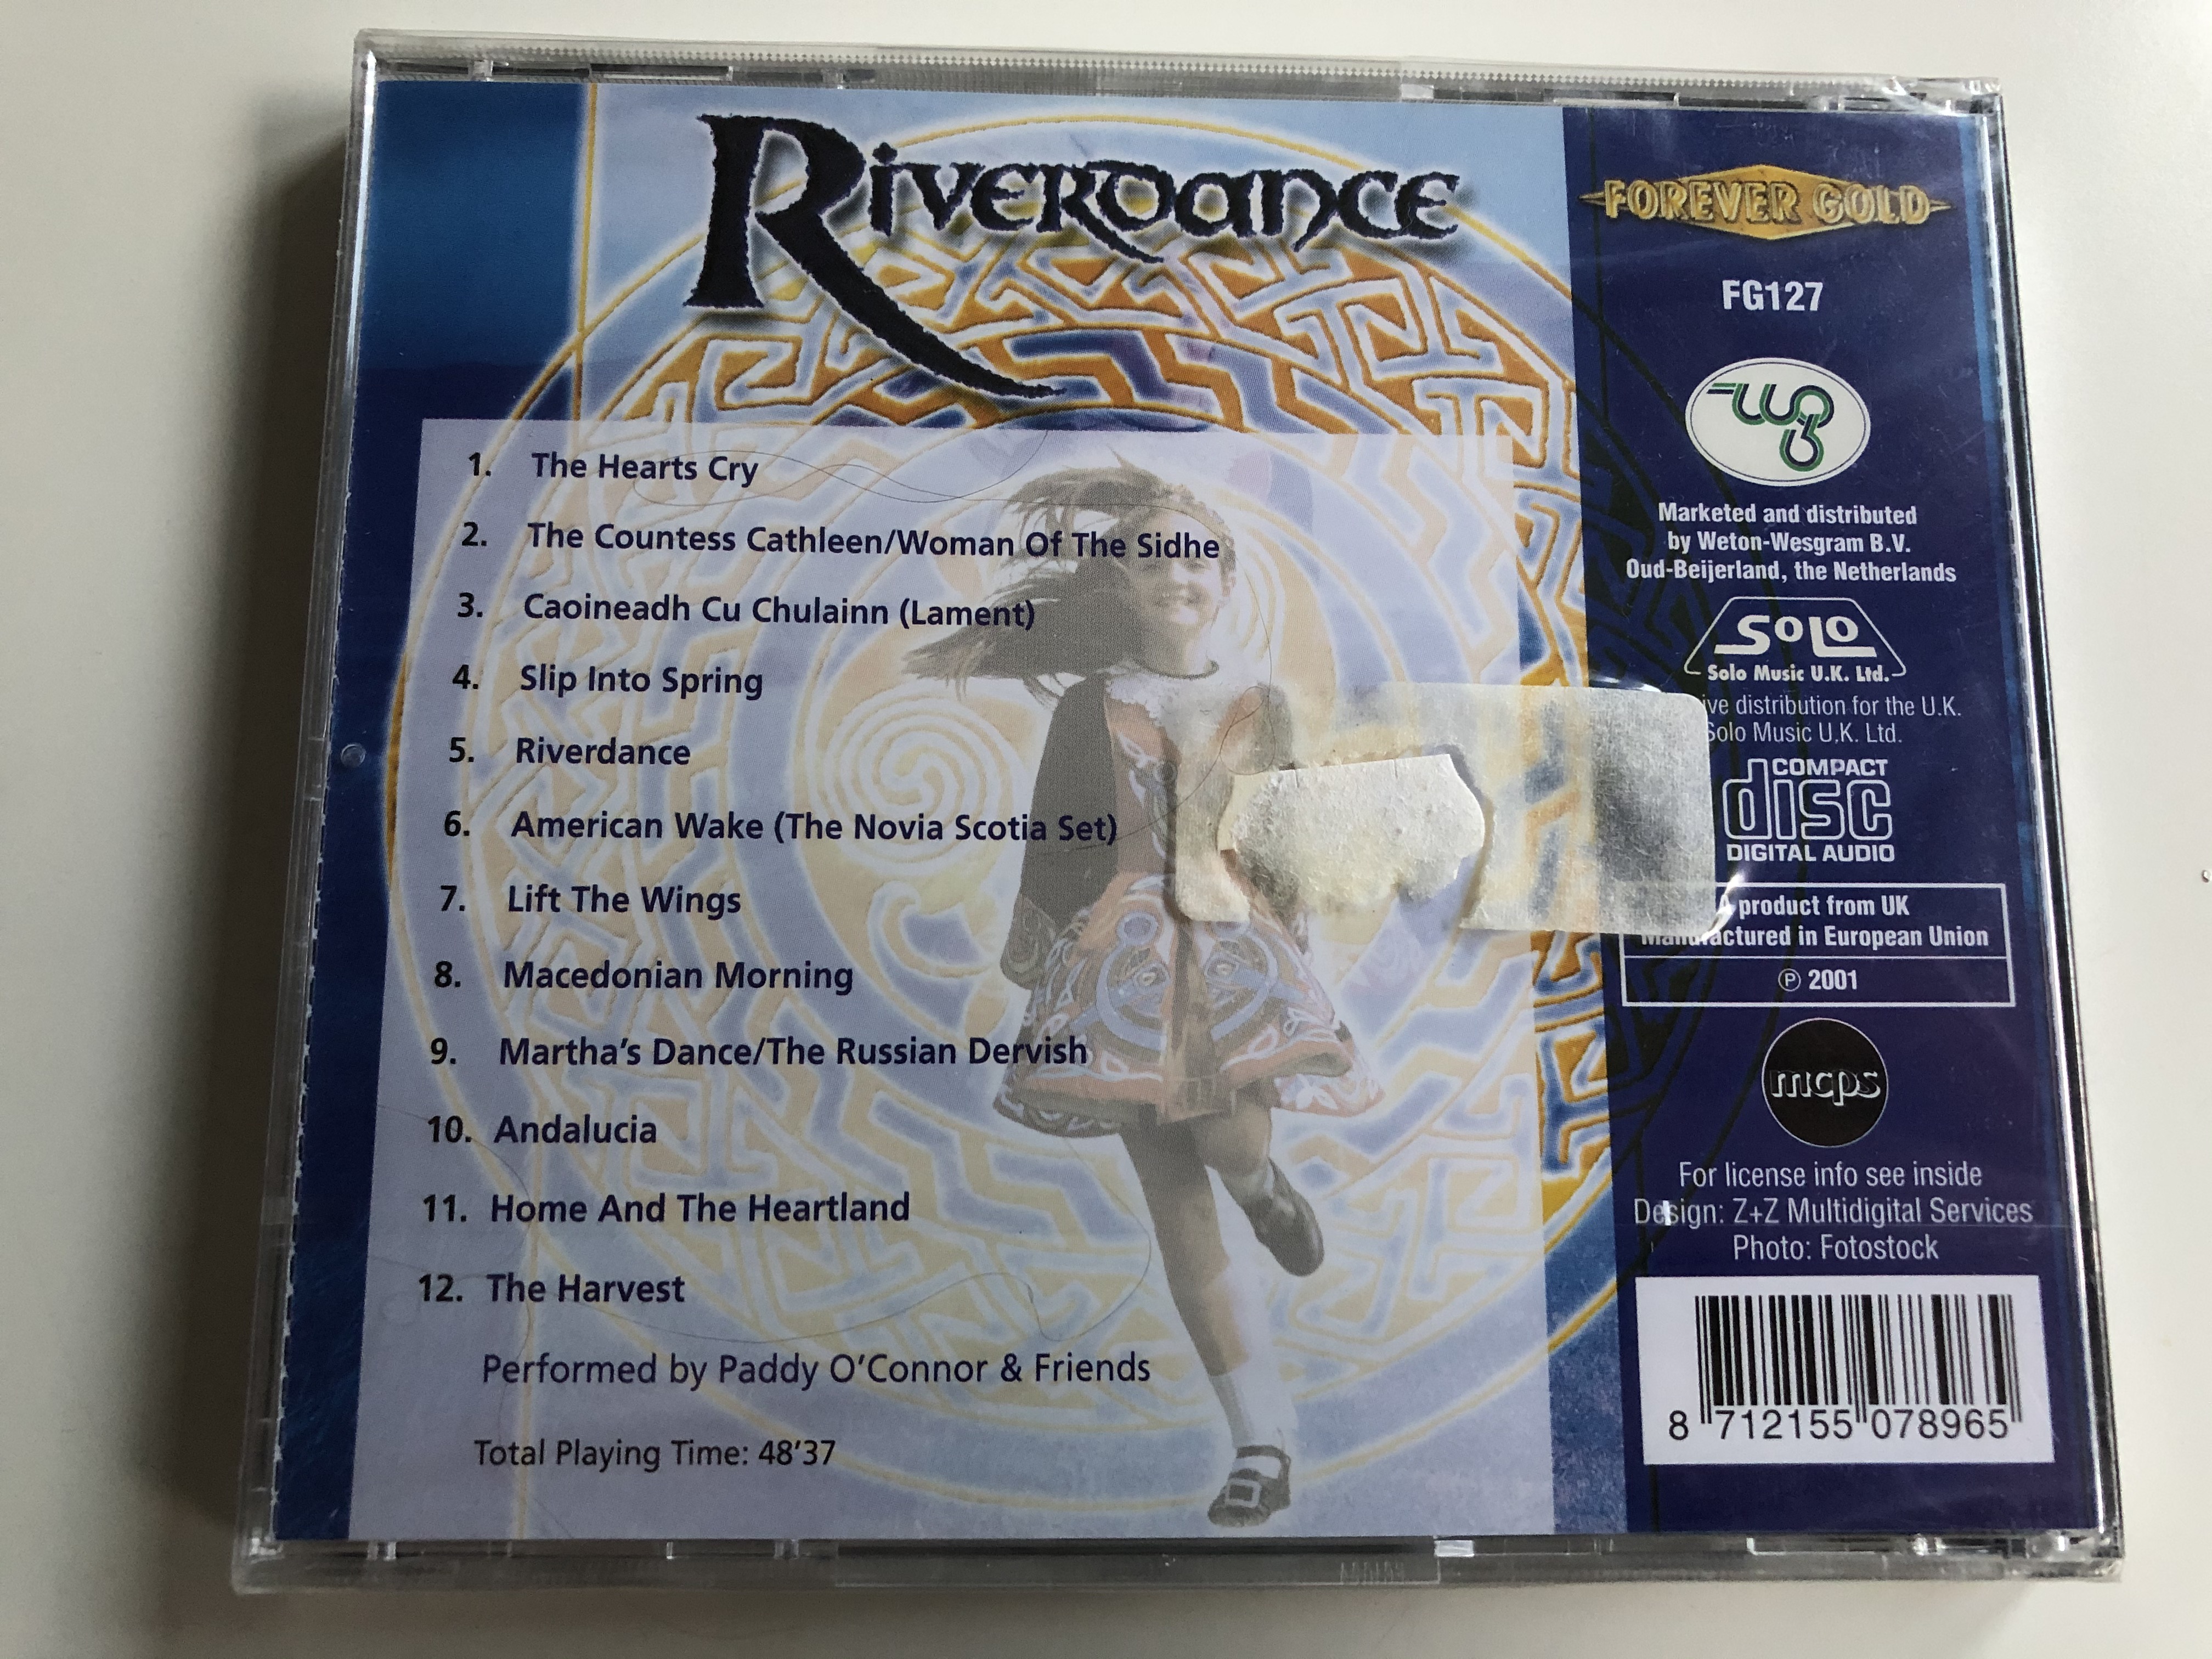 riverdance-the-hearts-cry-lift-the-wings-macedonian-morning-slip-into-spring-andalucia-forever-gold-audio-cd-2001-fg127-2-.jpg